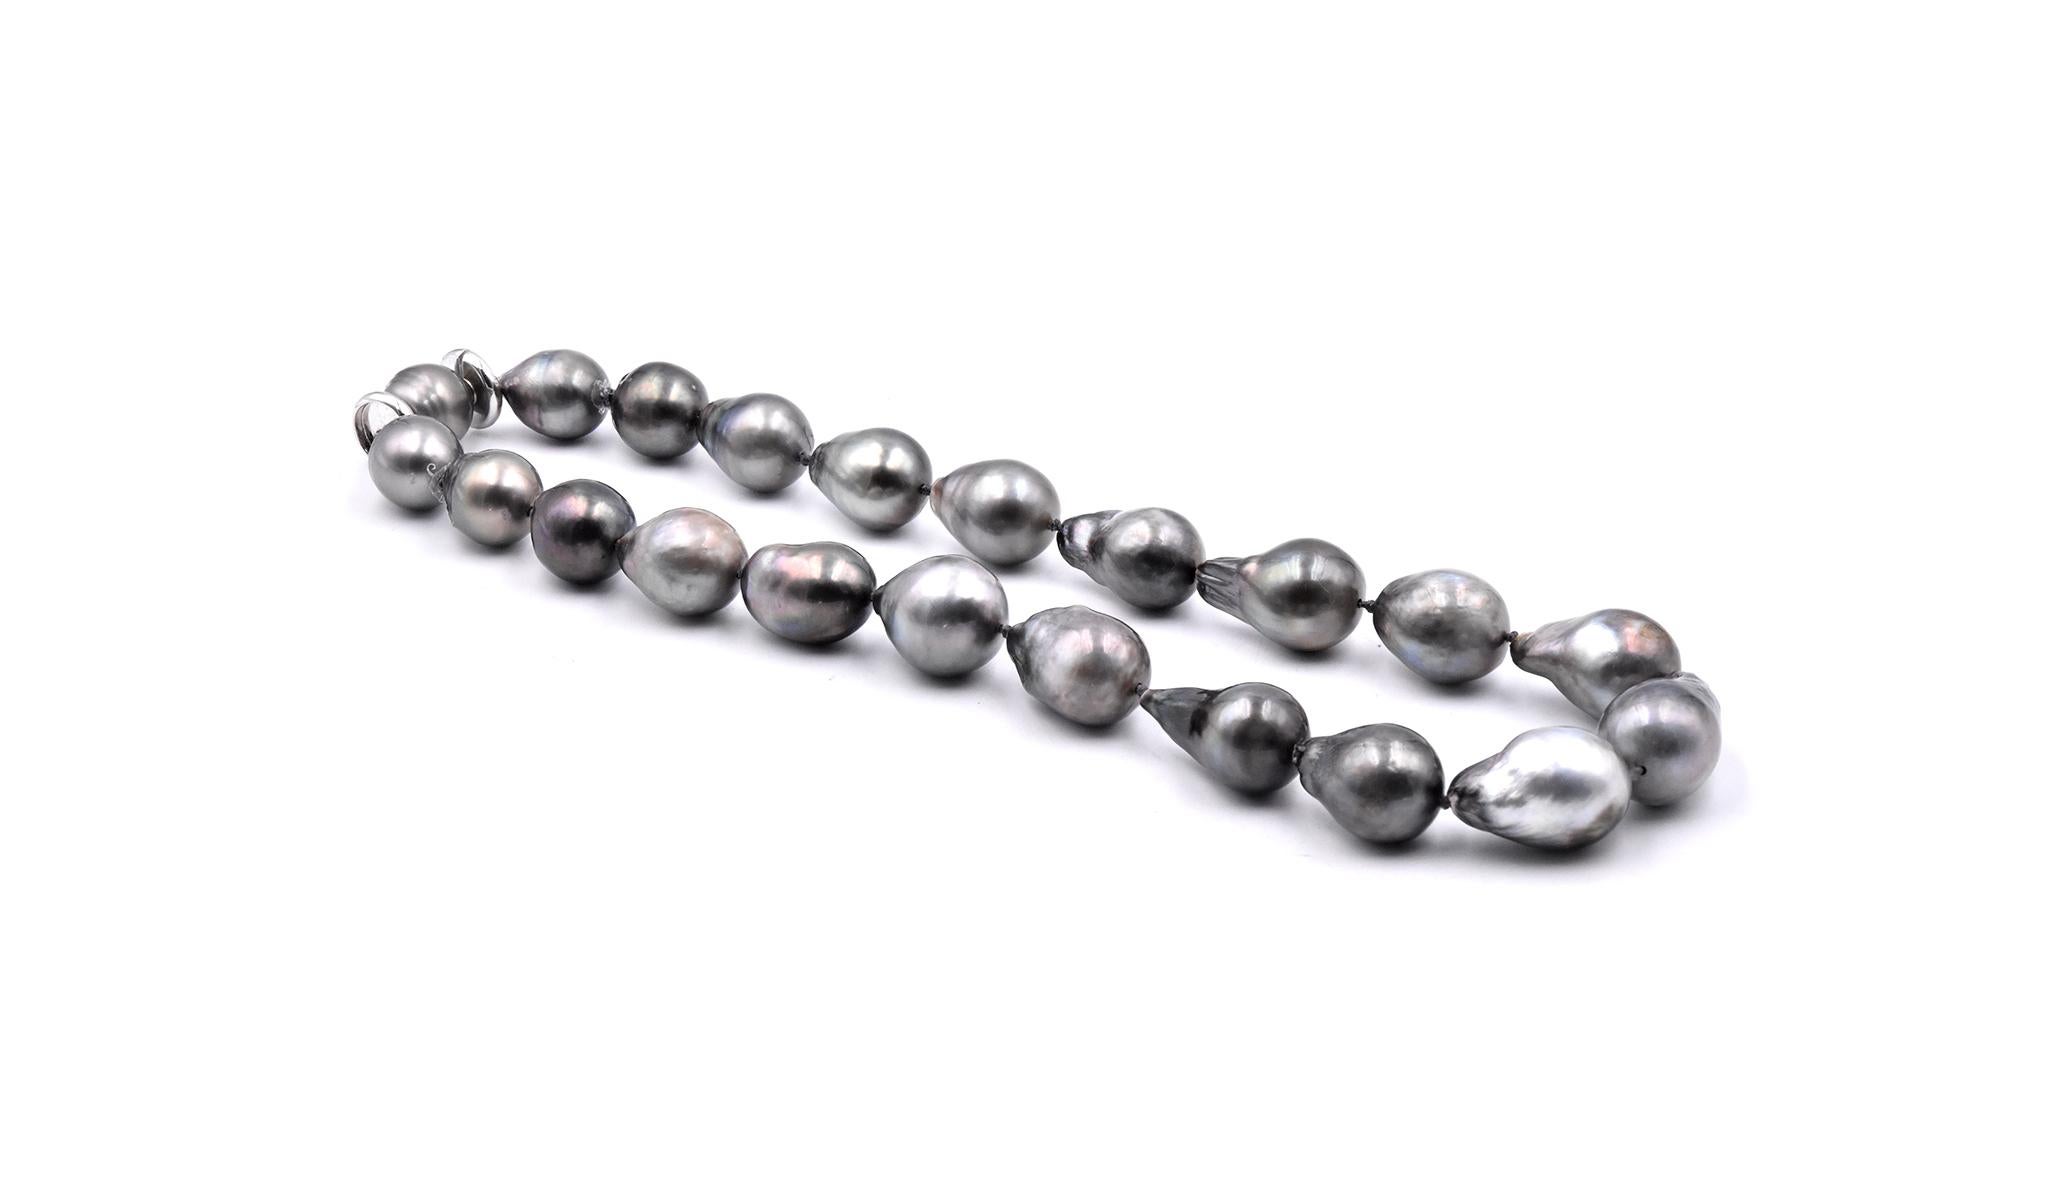 Designer: David Webb
Material: 18K yellow gold
Pearl: 17.5 – 25mm Black Baroque Pearls
Dimensions: necklace measures 19.5-inches in length
Weight: 153.87 grams
